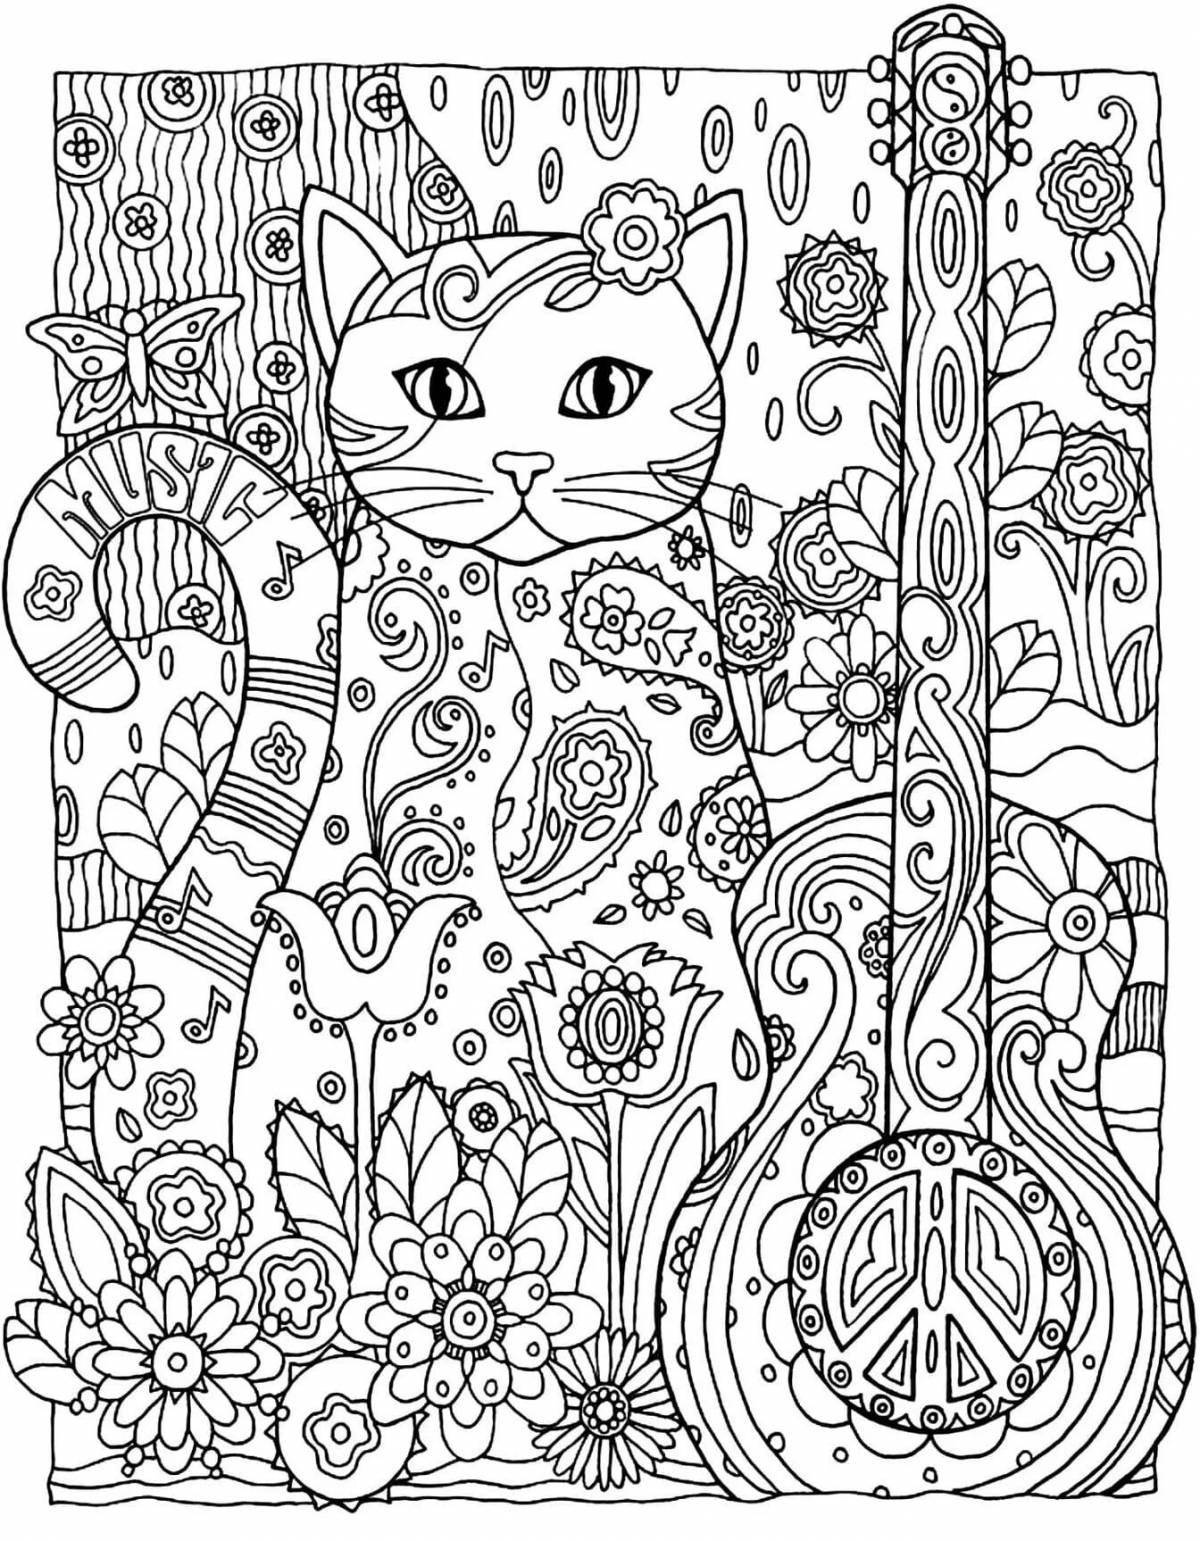 Adorable cat coloring book